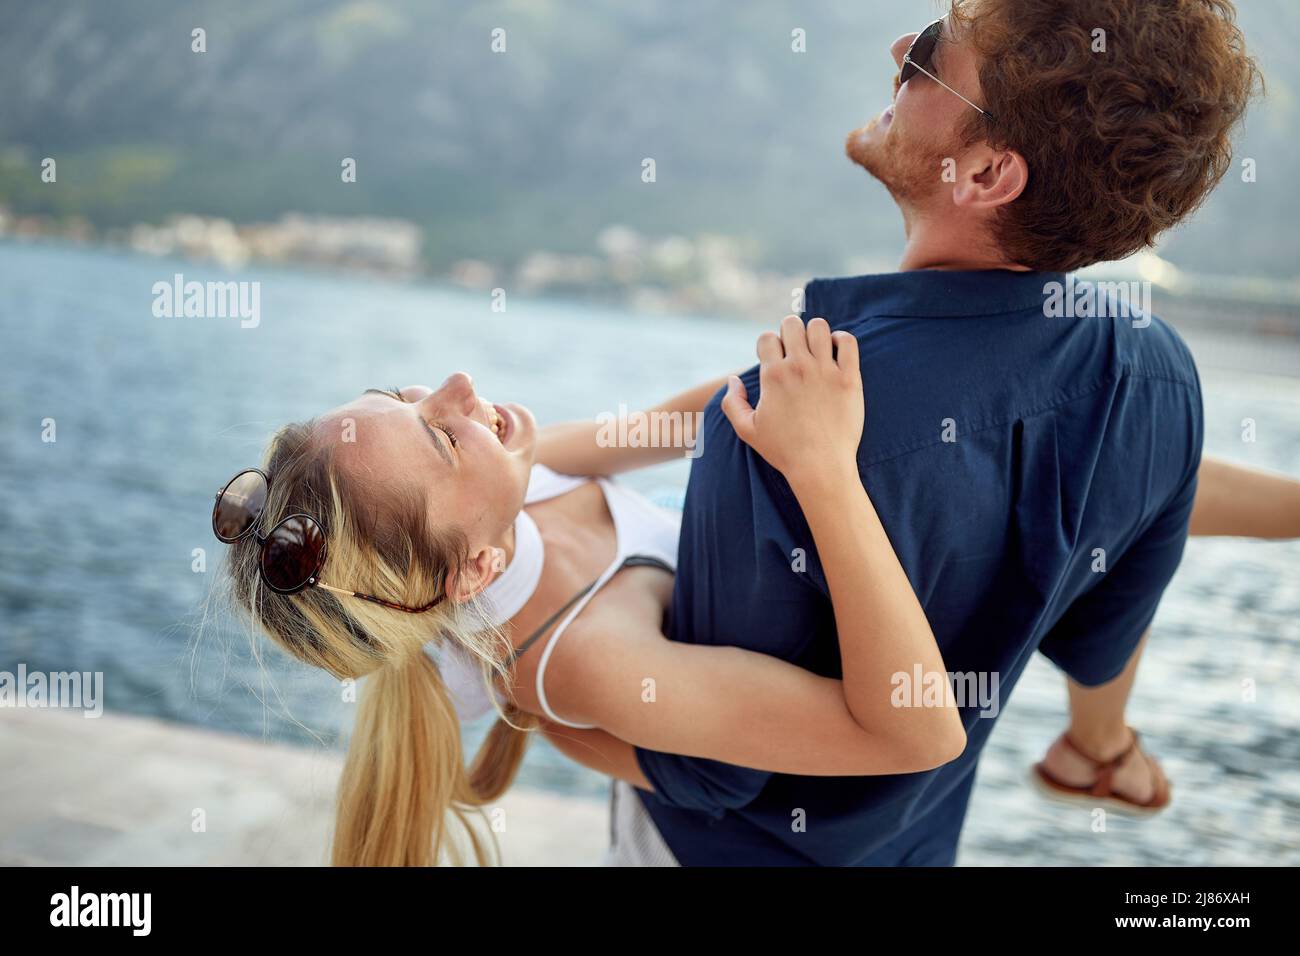 happiness romantic summer vacation.Young Couple in love laughing Stock Photo